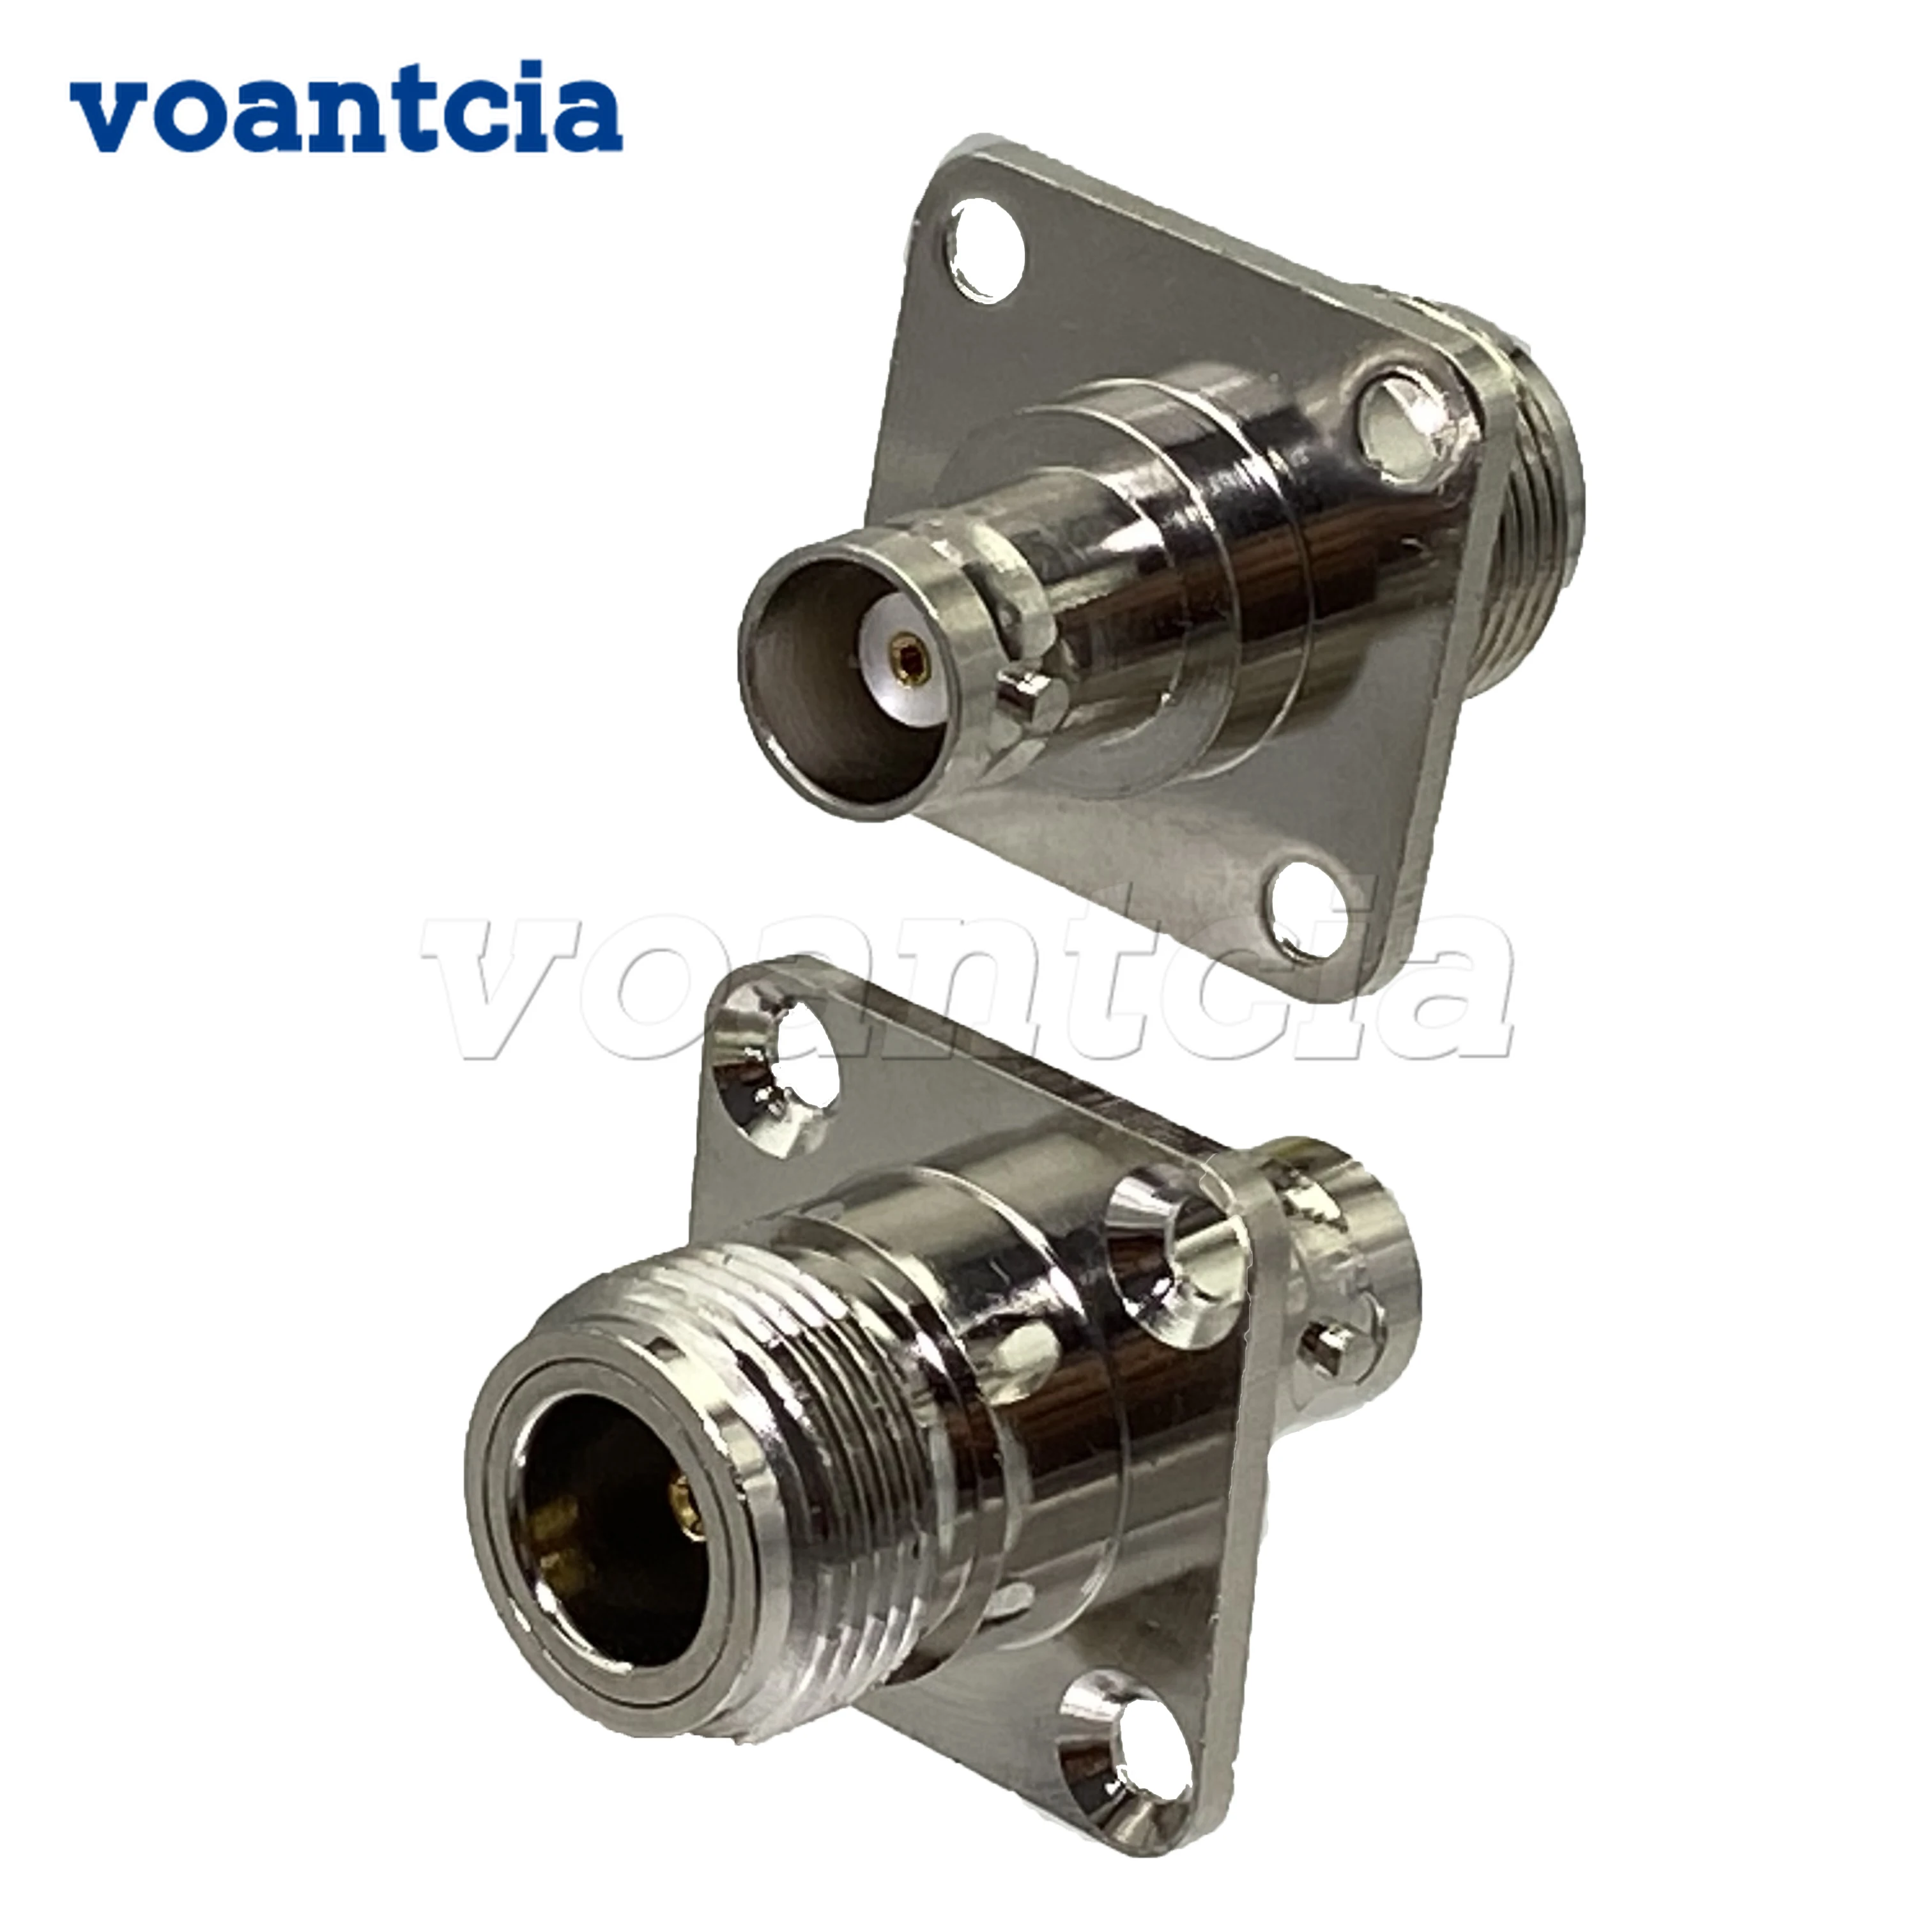 

10pcs Connector Adapter N Female Jack to BNC Female 4-Holes Flange RF Coaxial Converter Wire Terminal New Brass